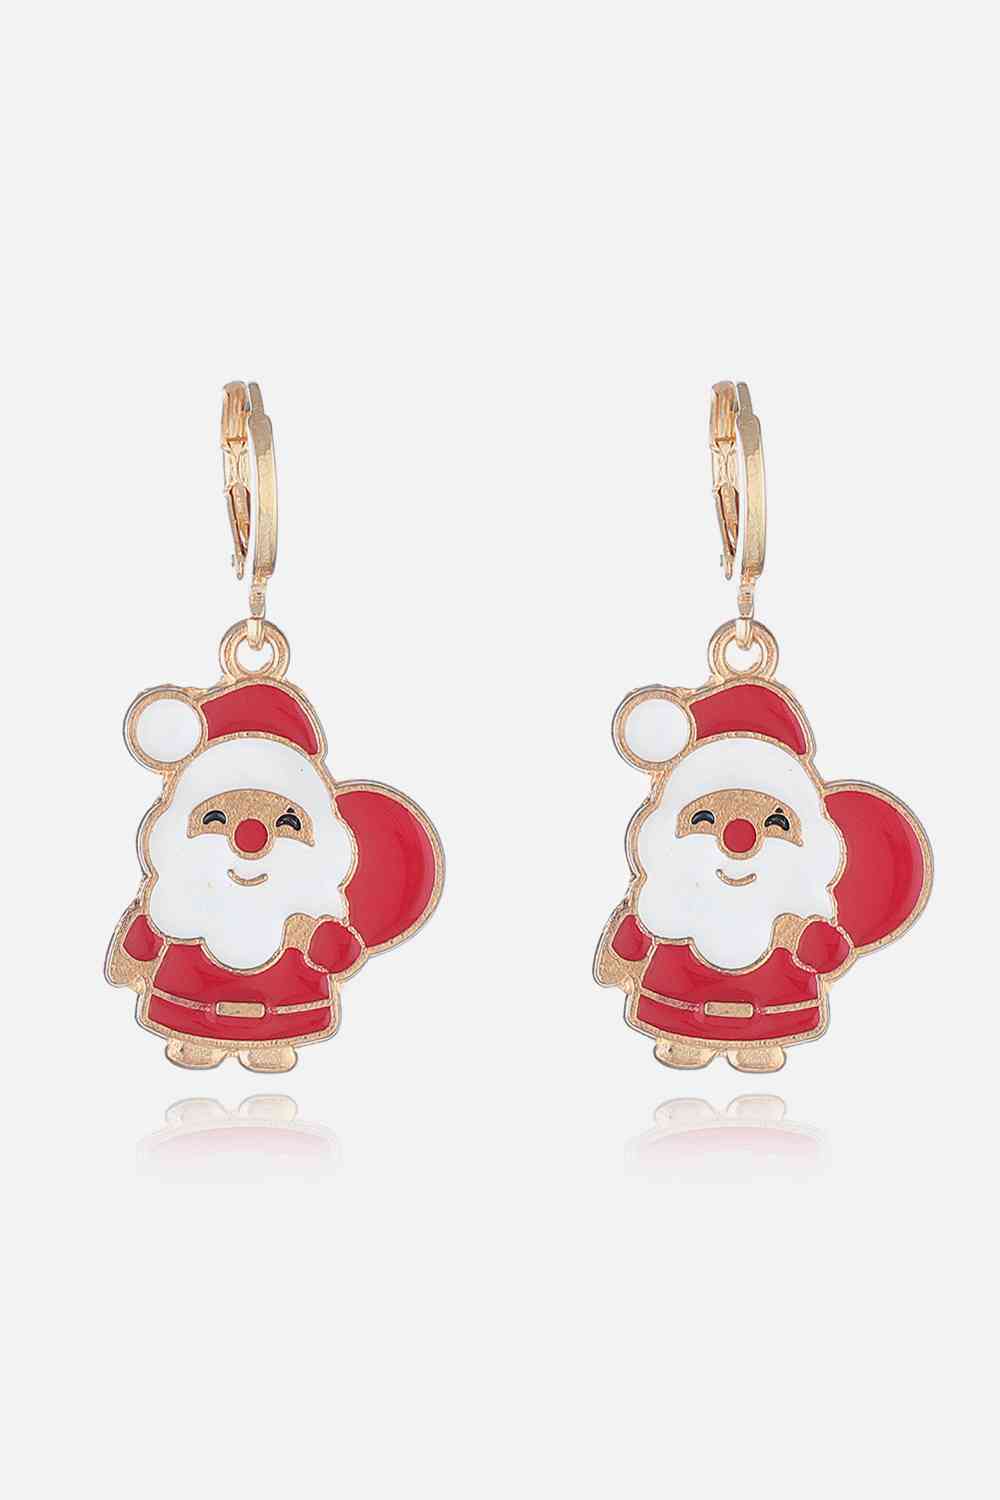 Christmas Alloy Earrings for Women Style L One Size